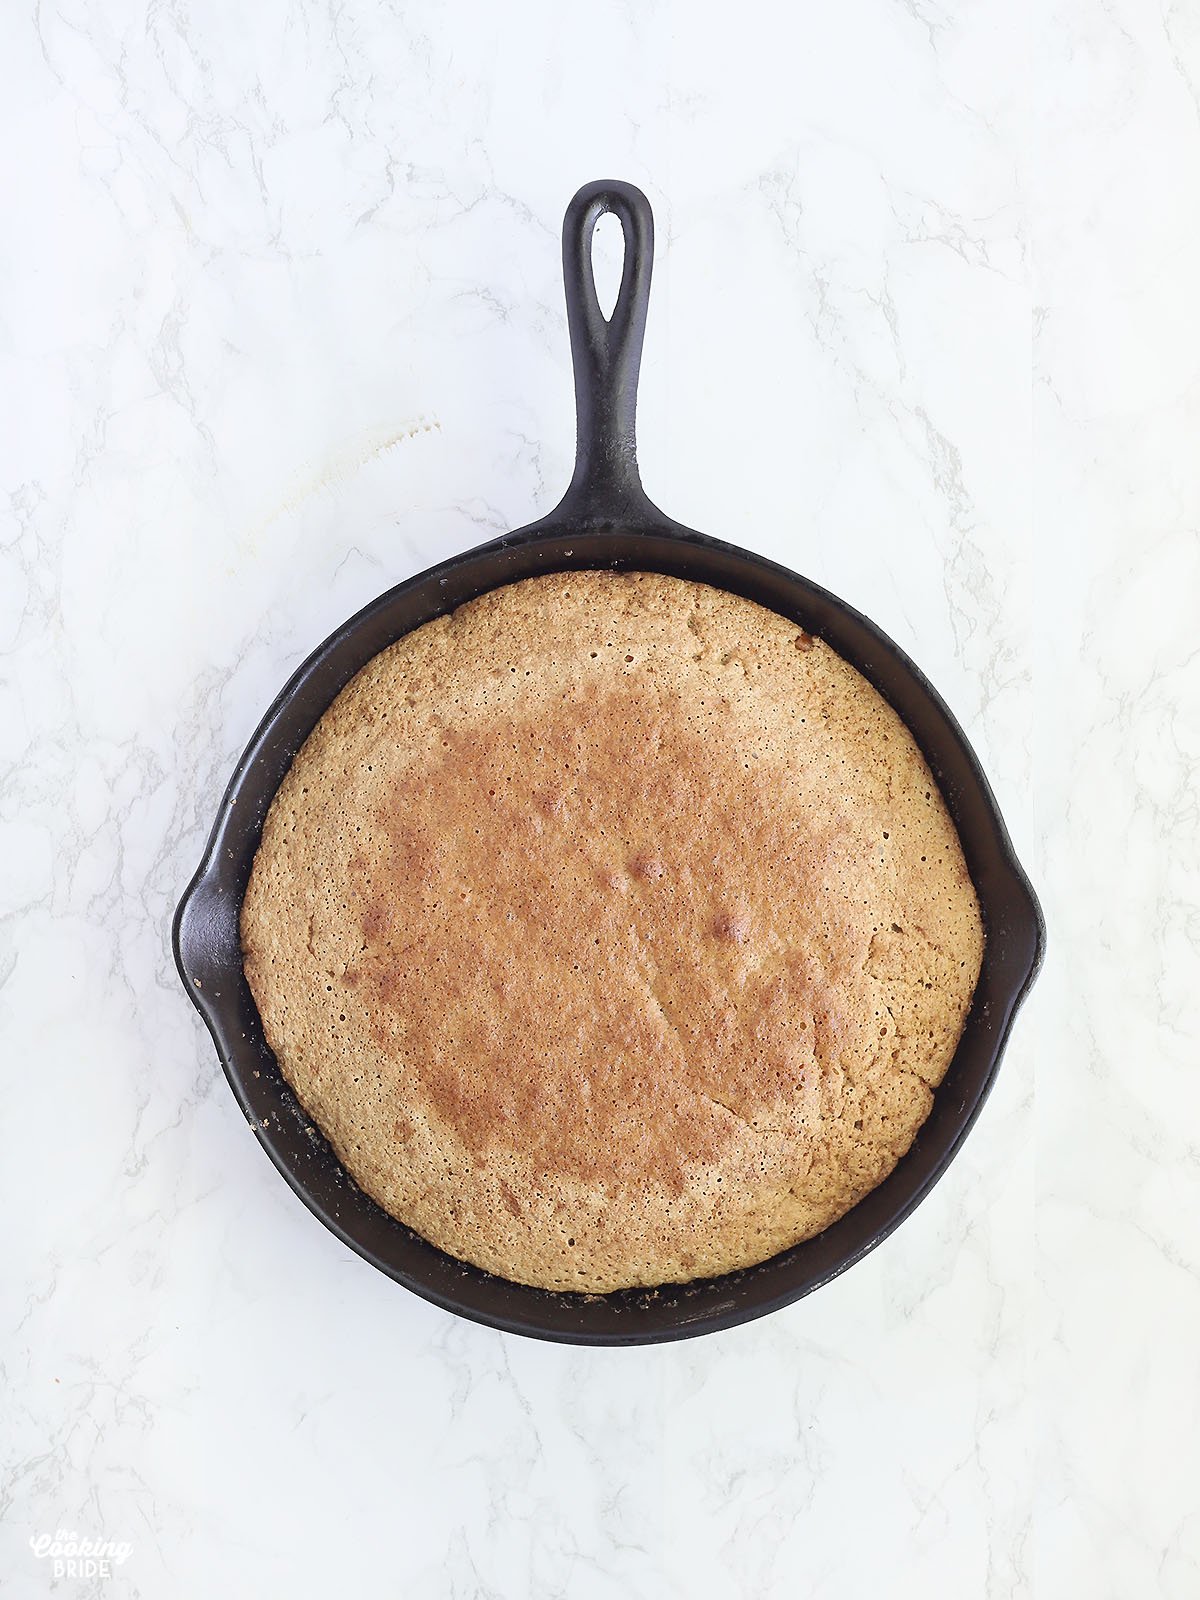 baked cake in a cast iron skillet before being inverted on a plate